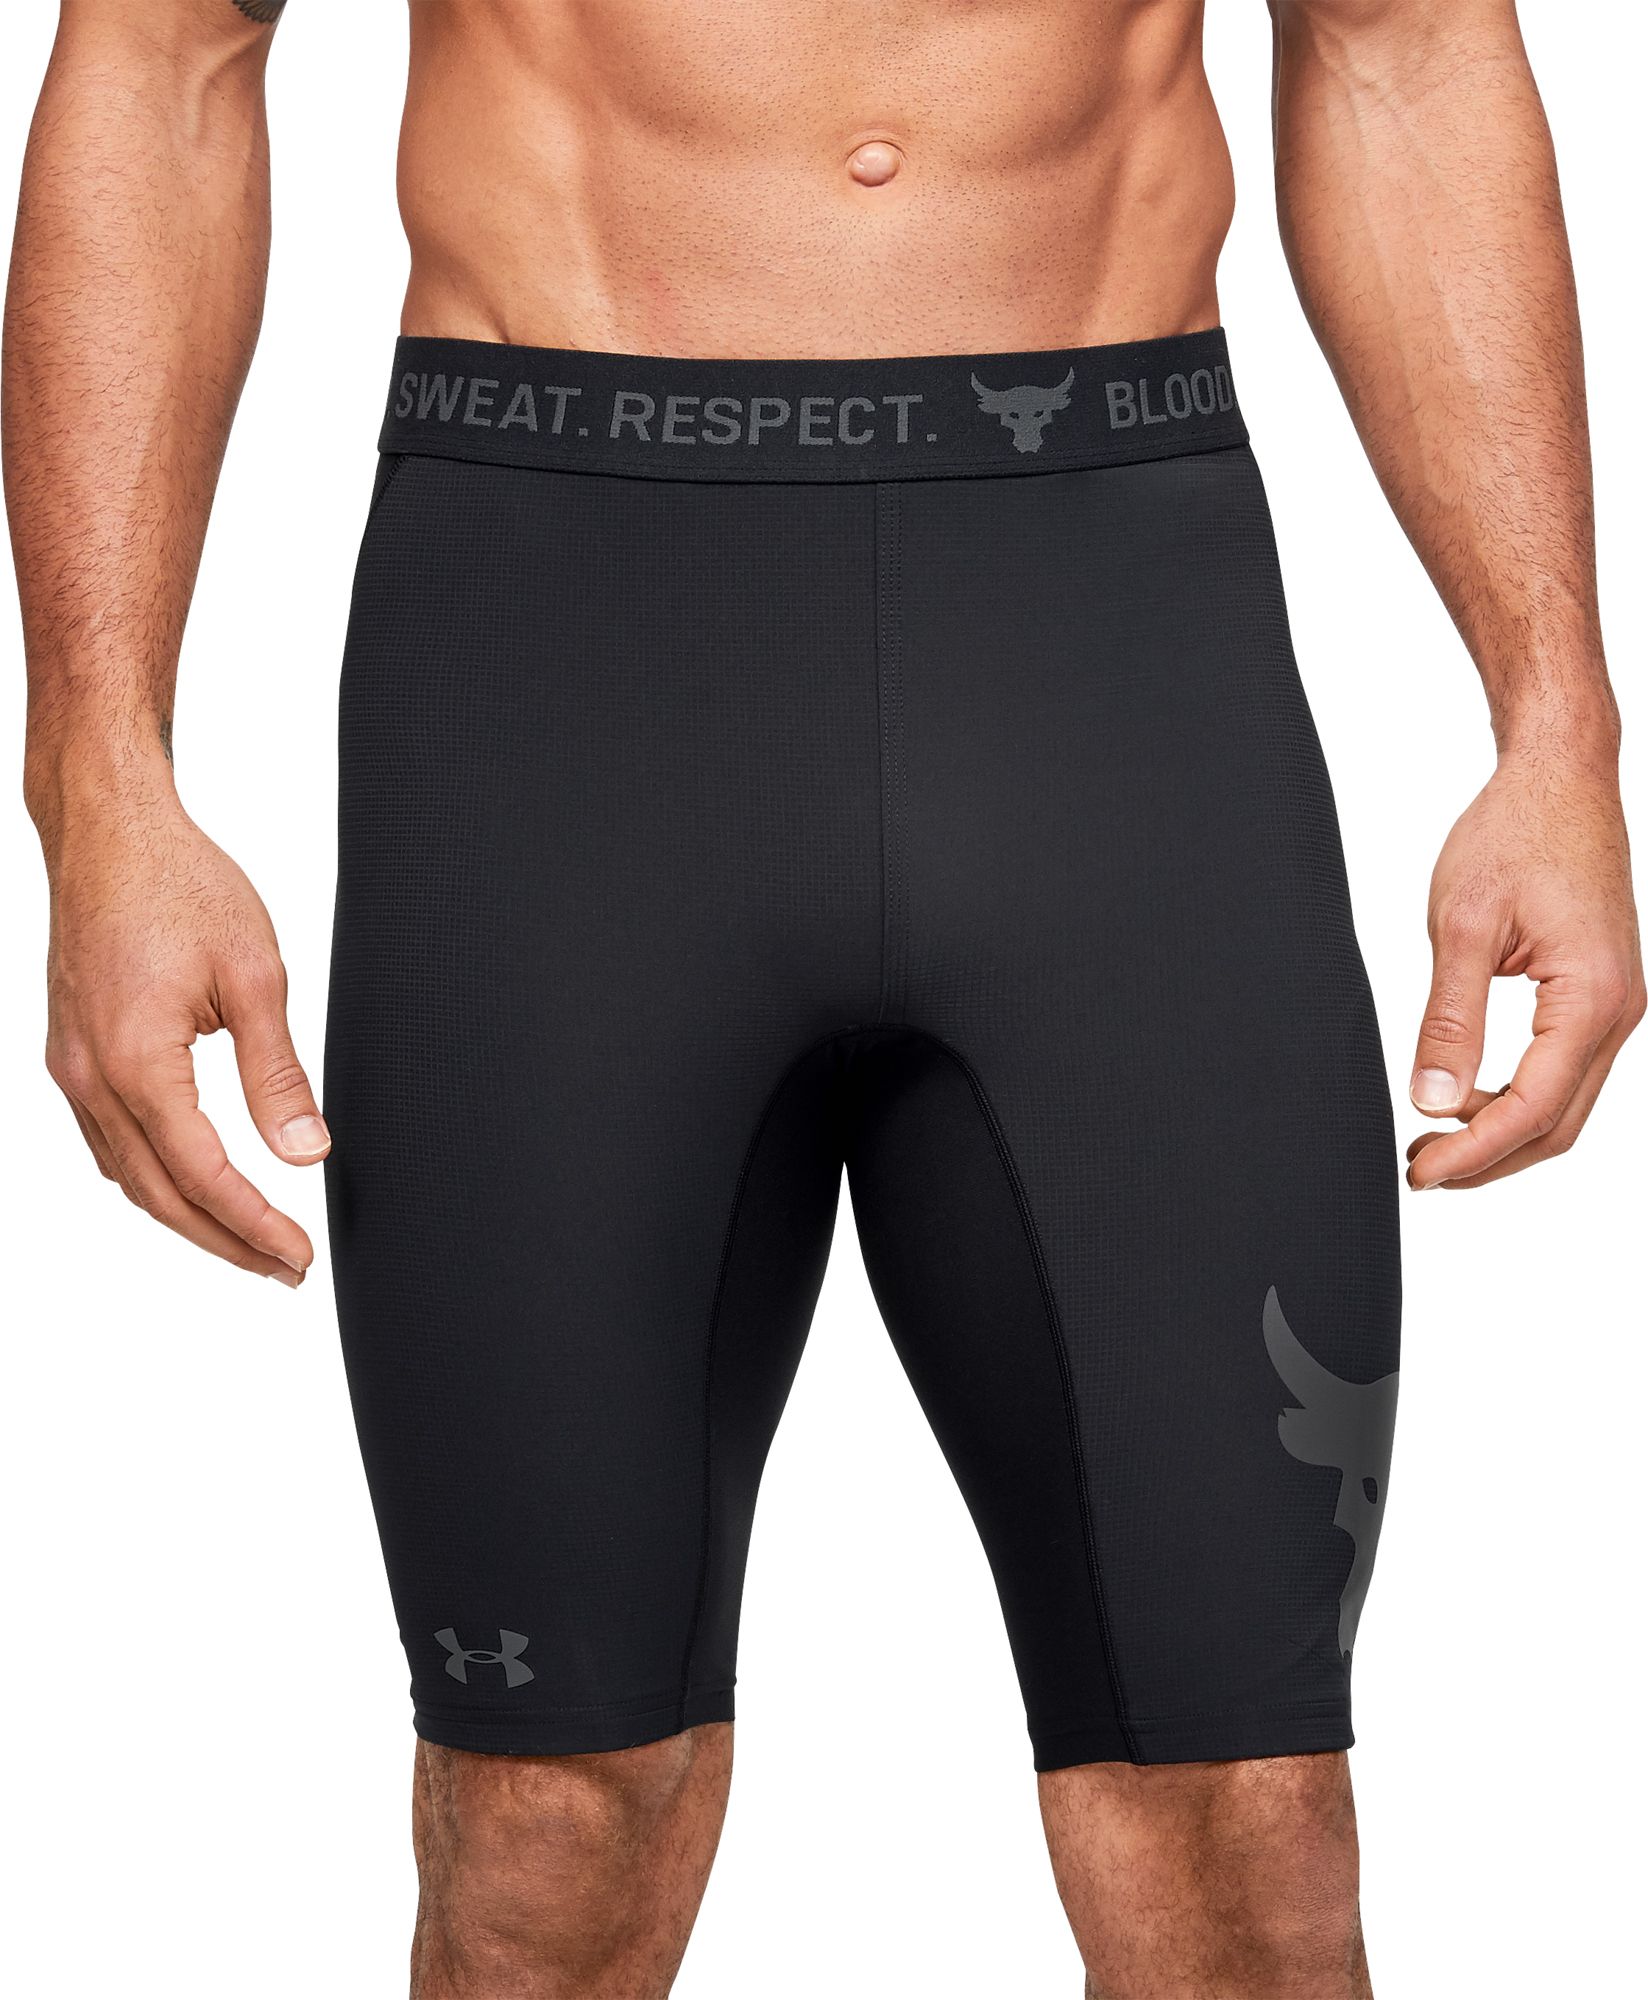 armour compression shorts